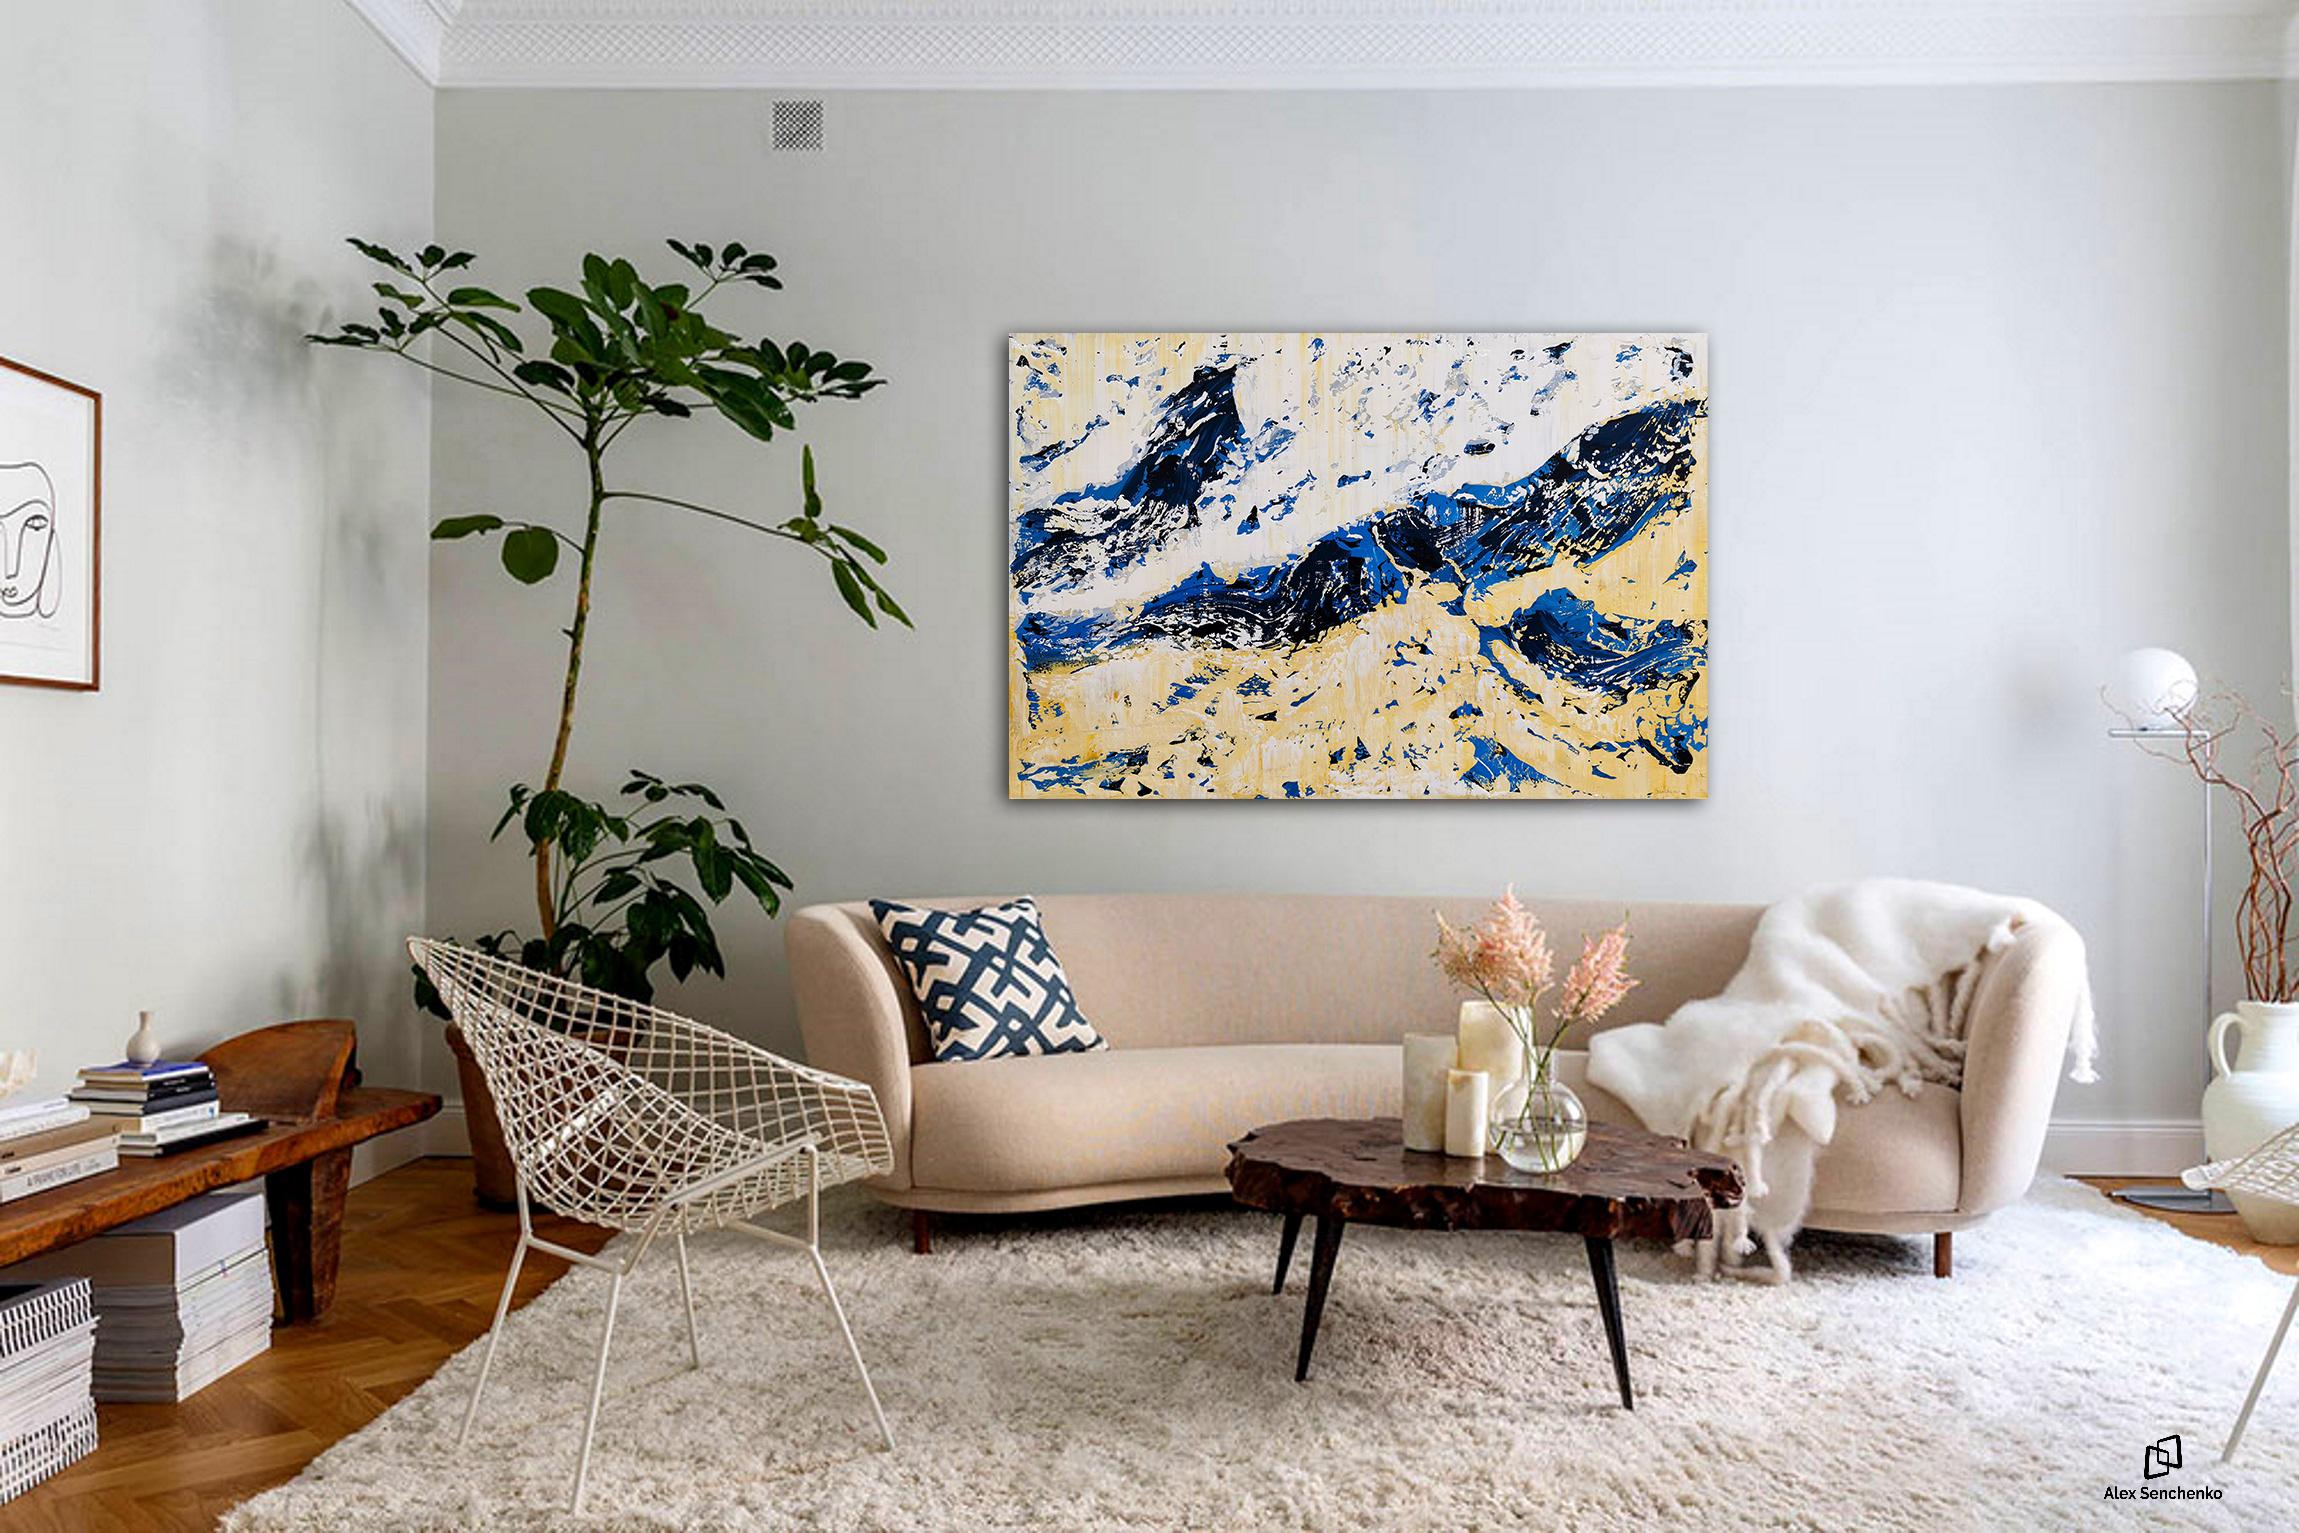 There’s something ethereal, almost magical, about contemporary paintings. The incredible Expressionism bleeds through the canvas, transforming any room into an entirely new experience. Alex Senchenko’s - Abstract 2232 - painting will give your space